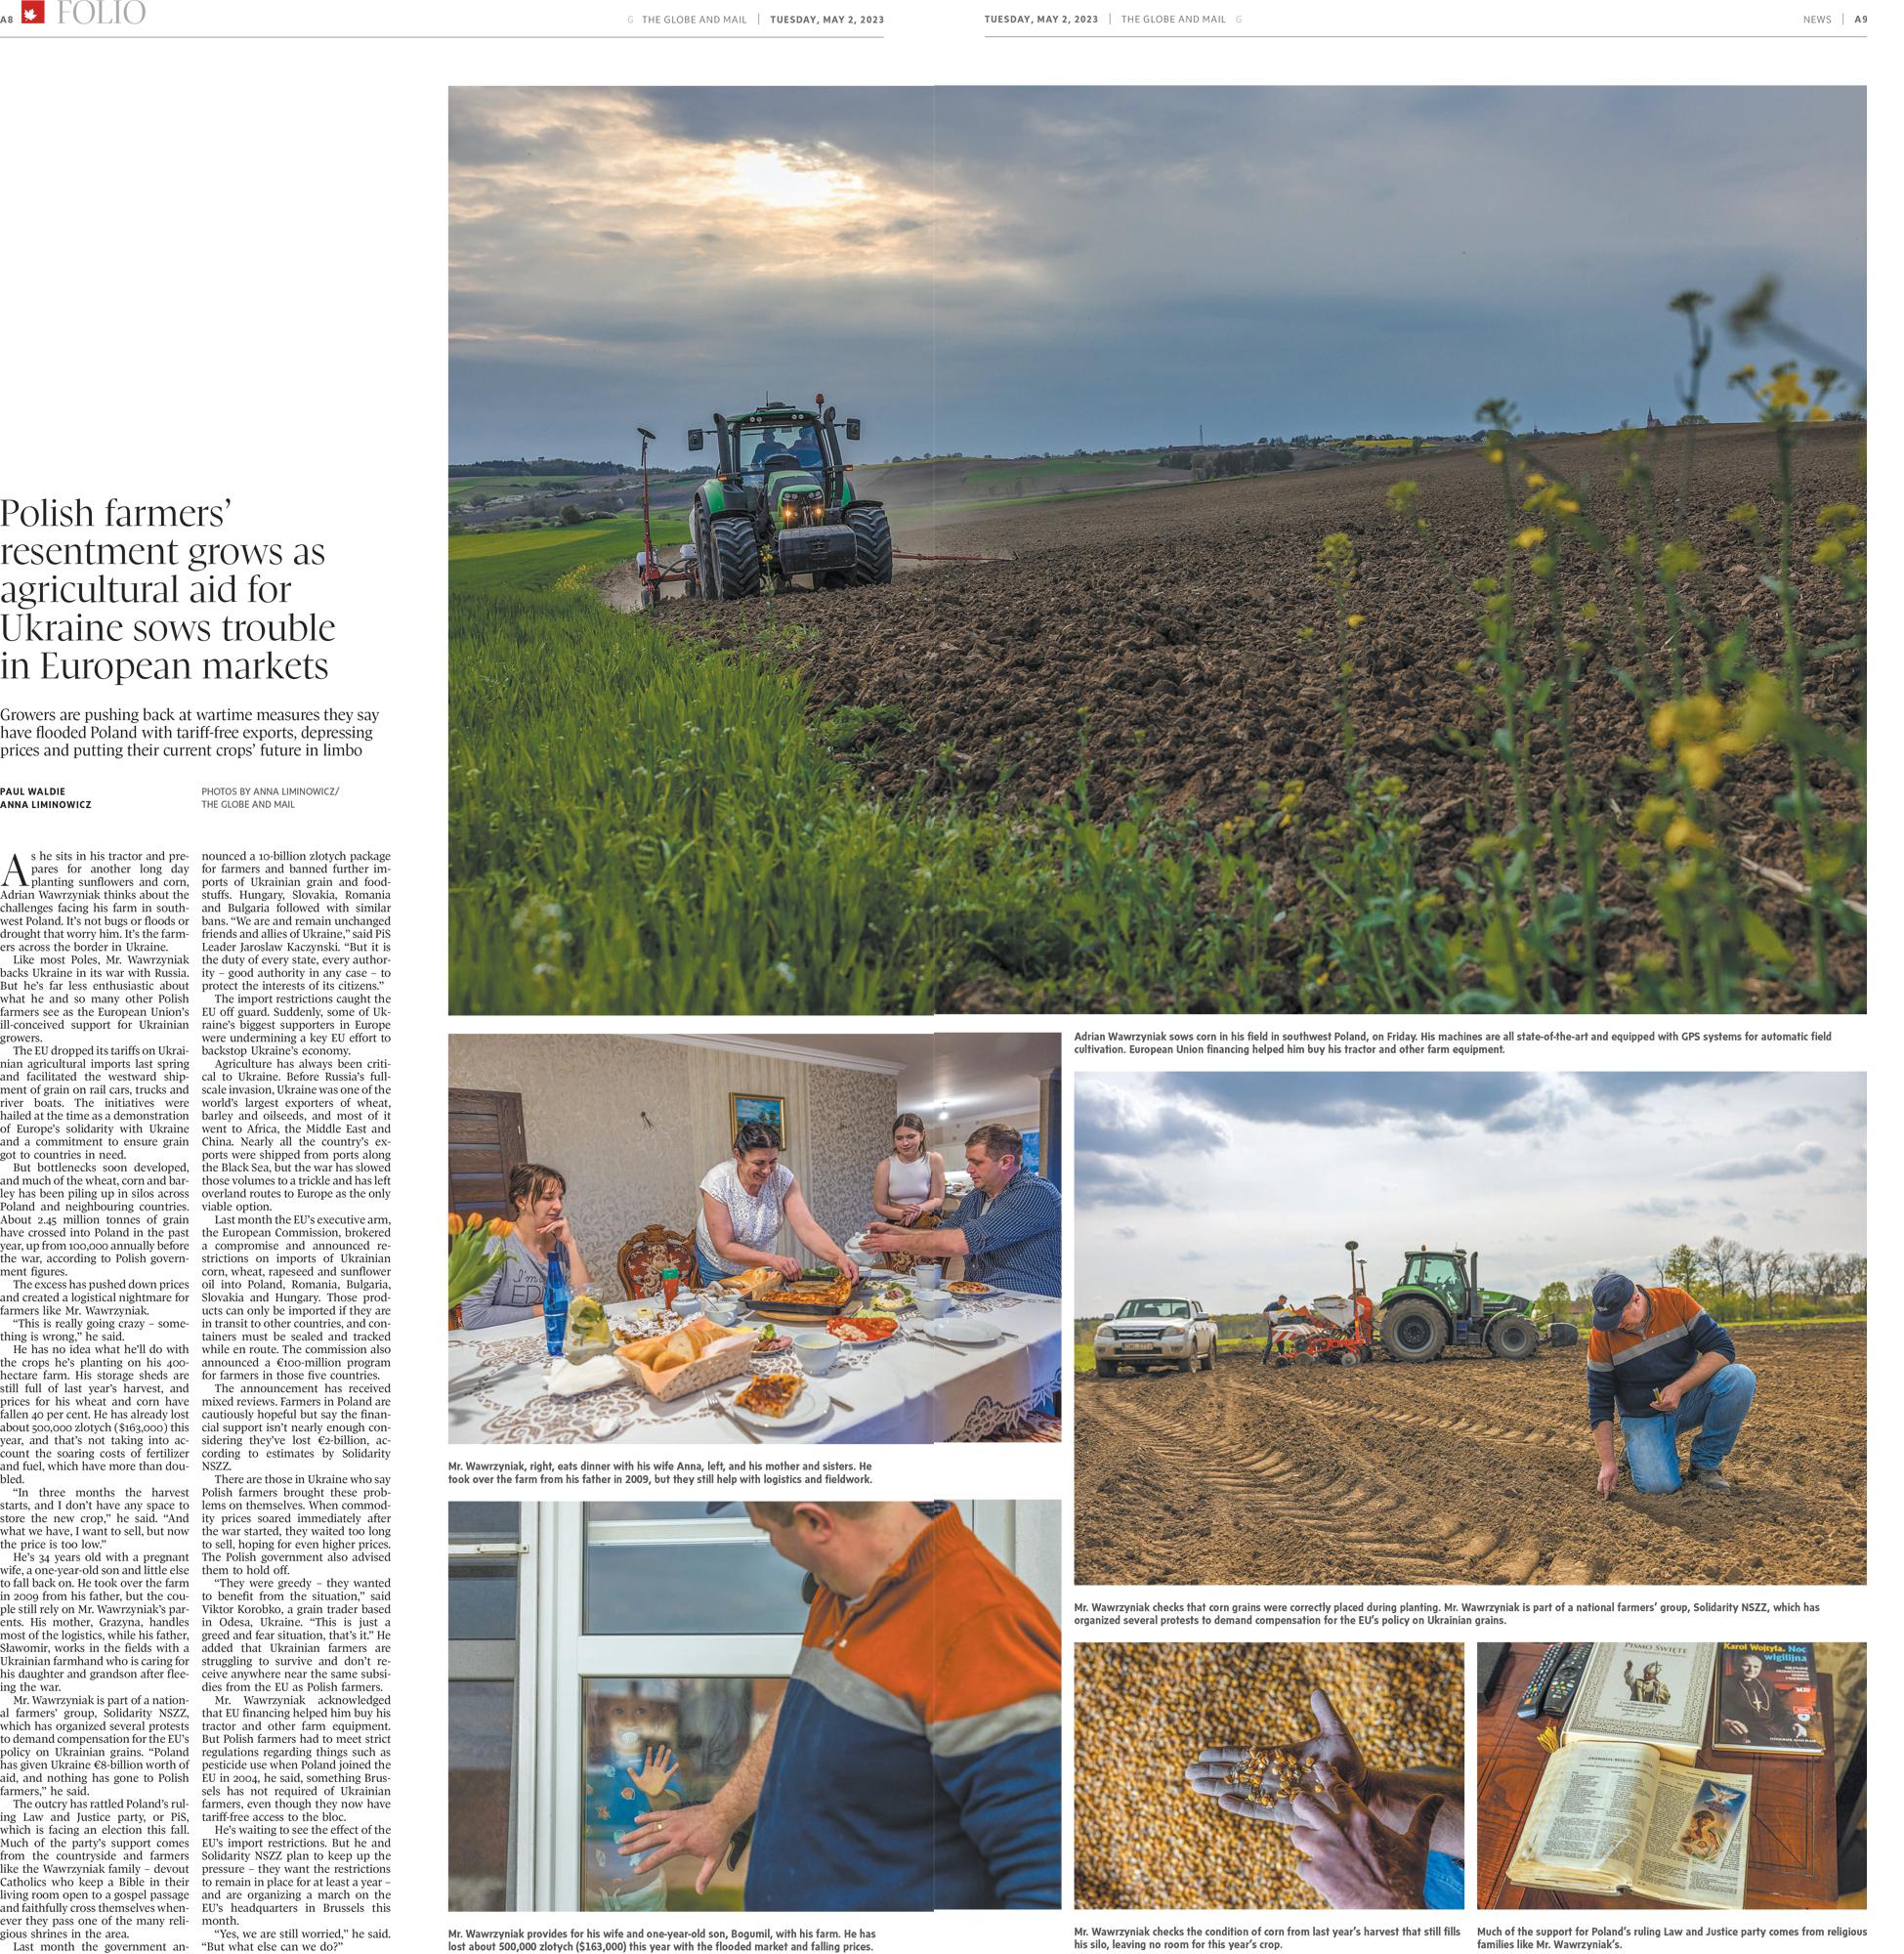 SOWING TROUBLE IN POLISH SOIL- for The Globe&Mail